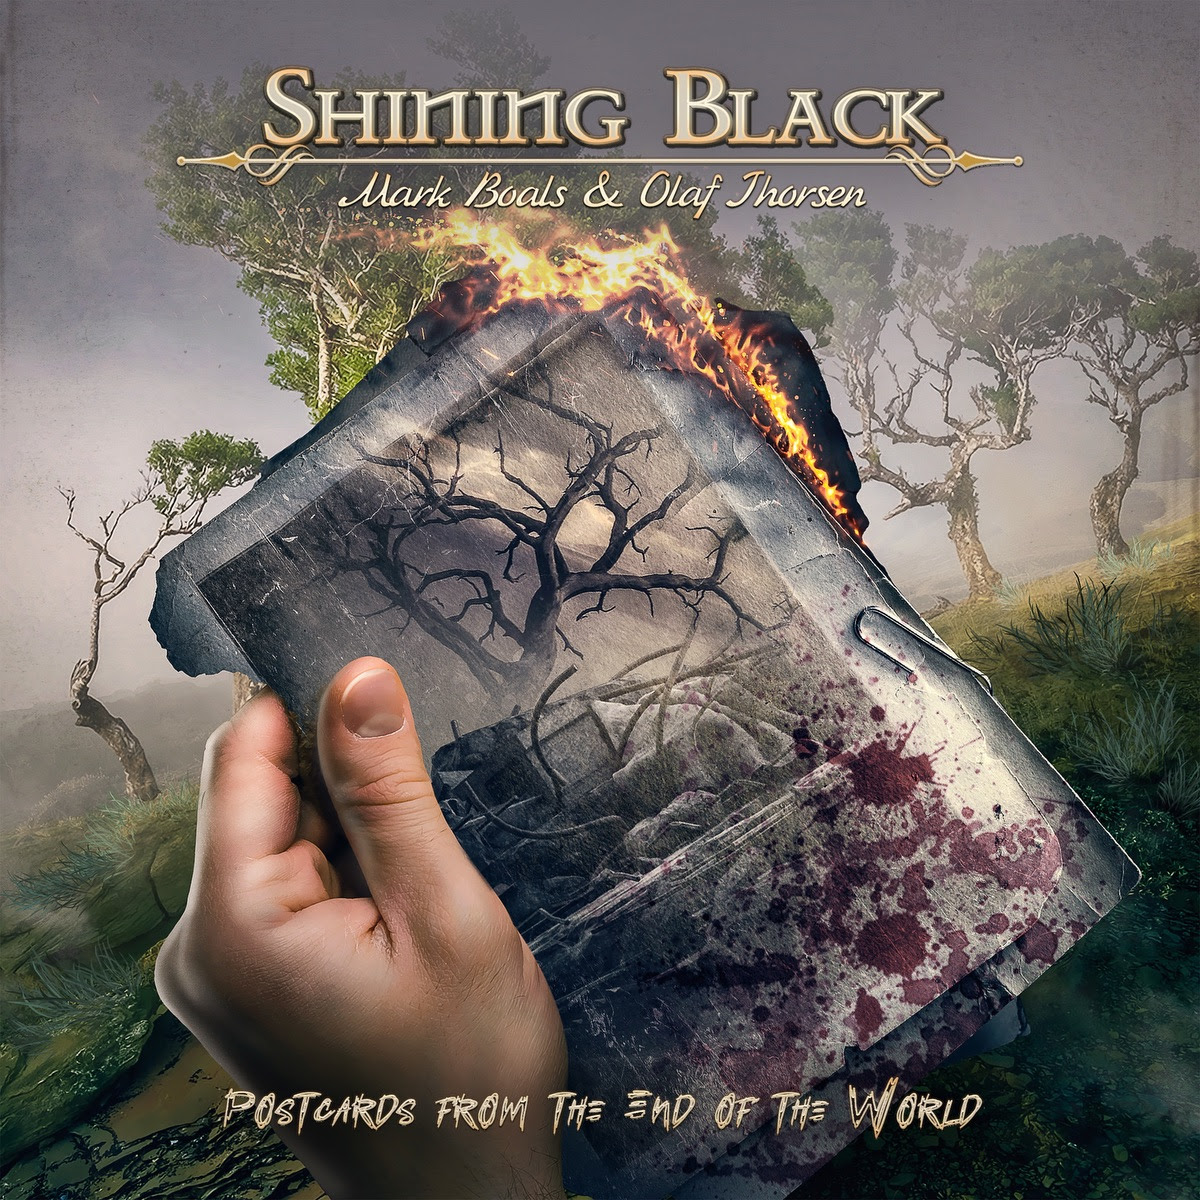 Shining-Black-Postcards-From-the-End-of-the-World.jpg